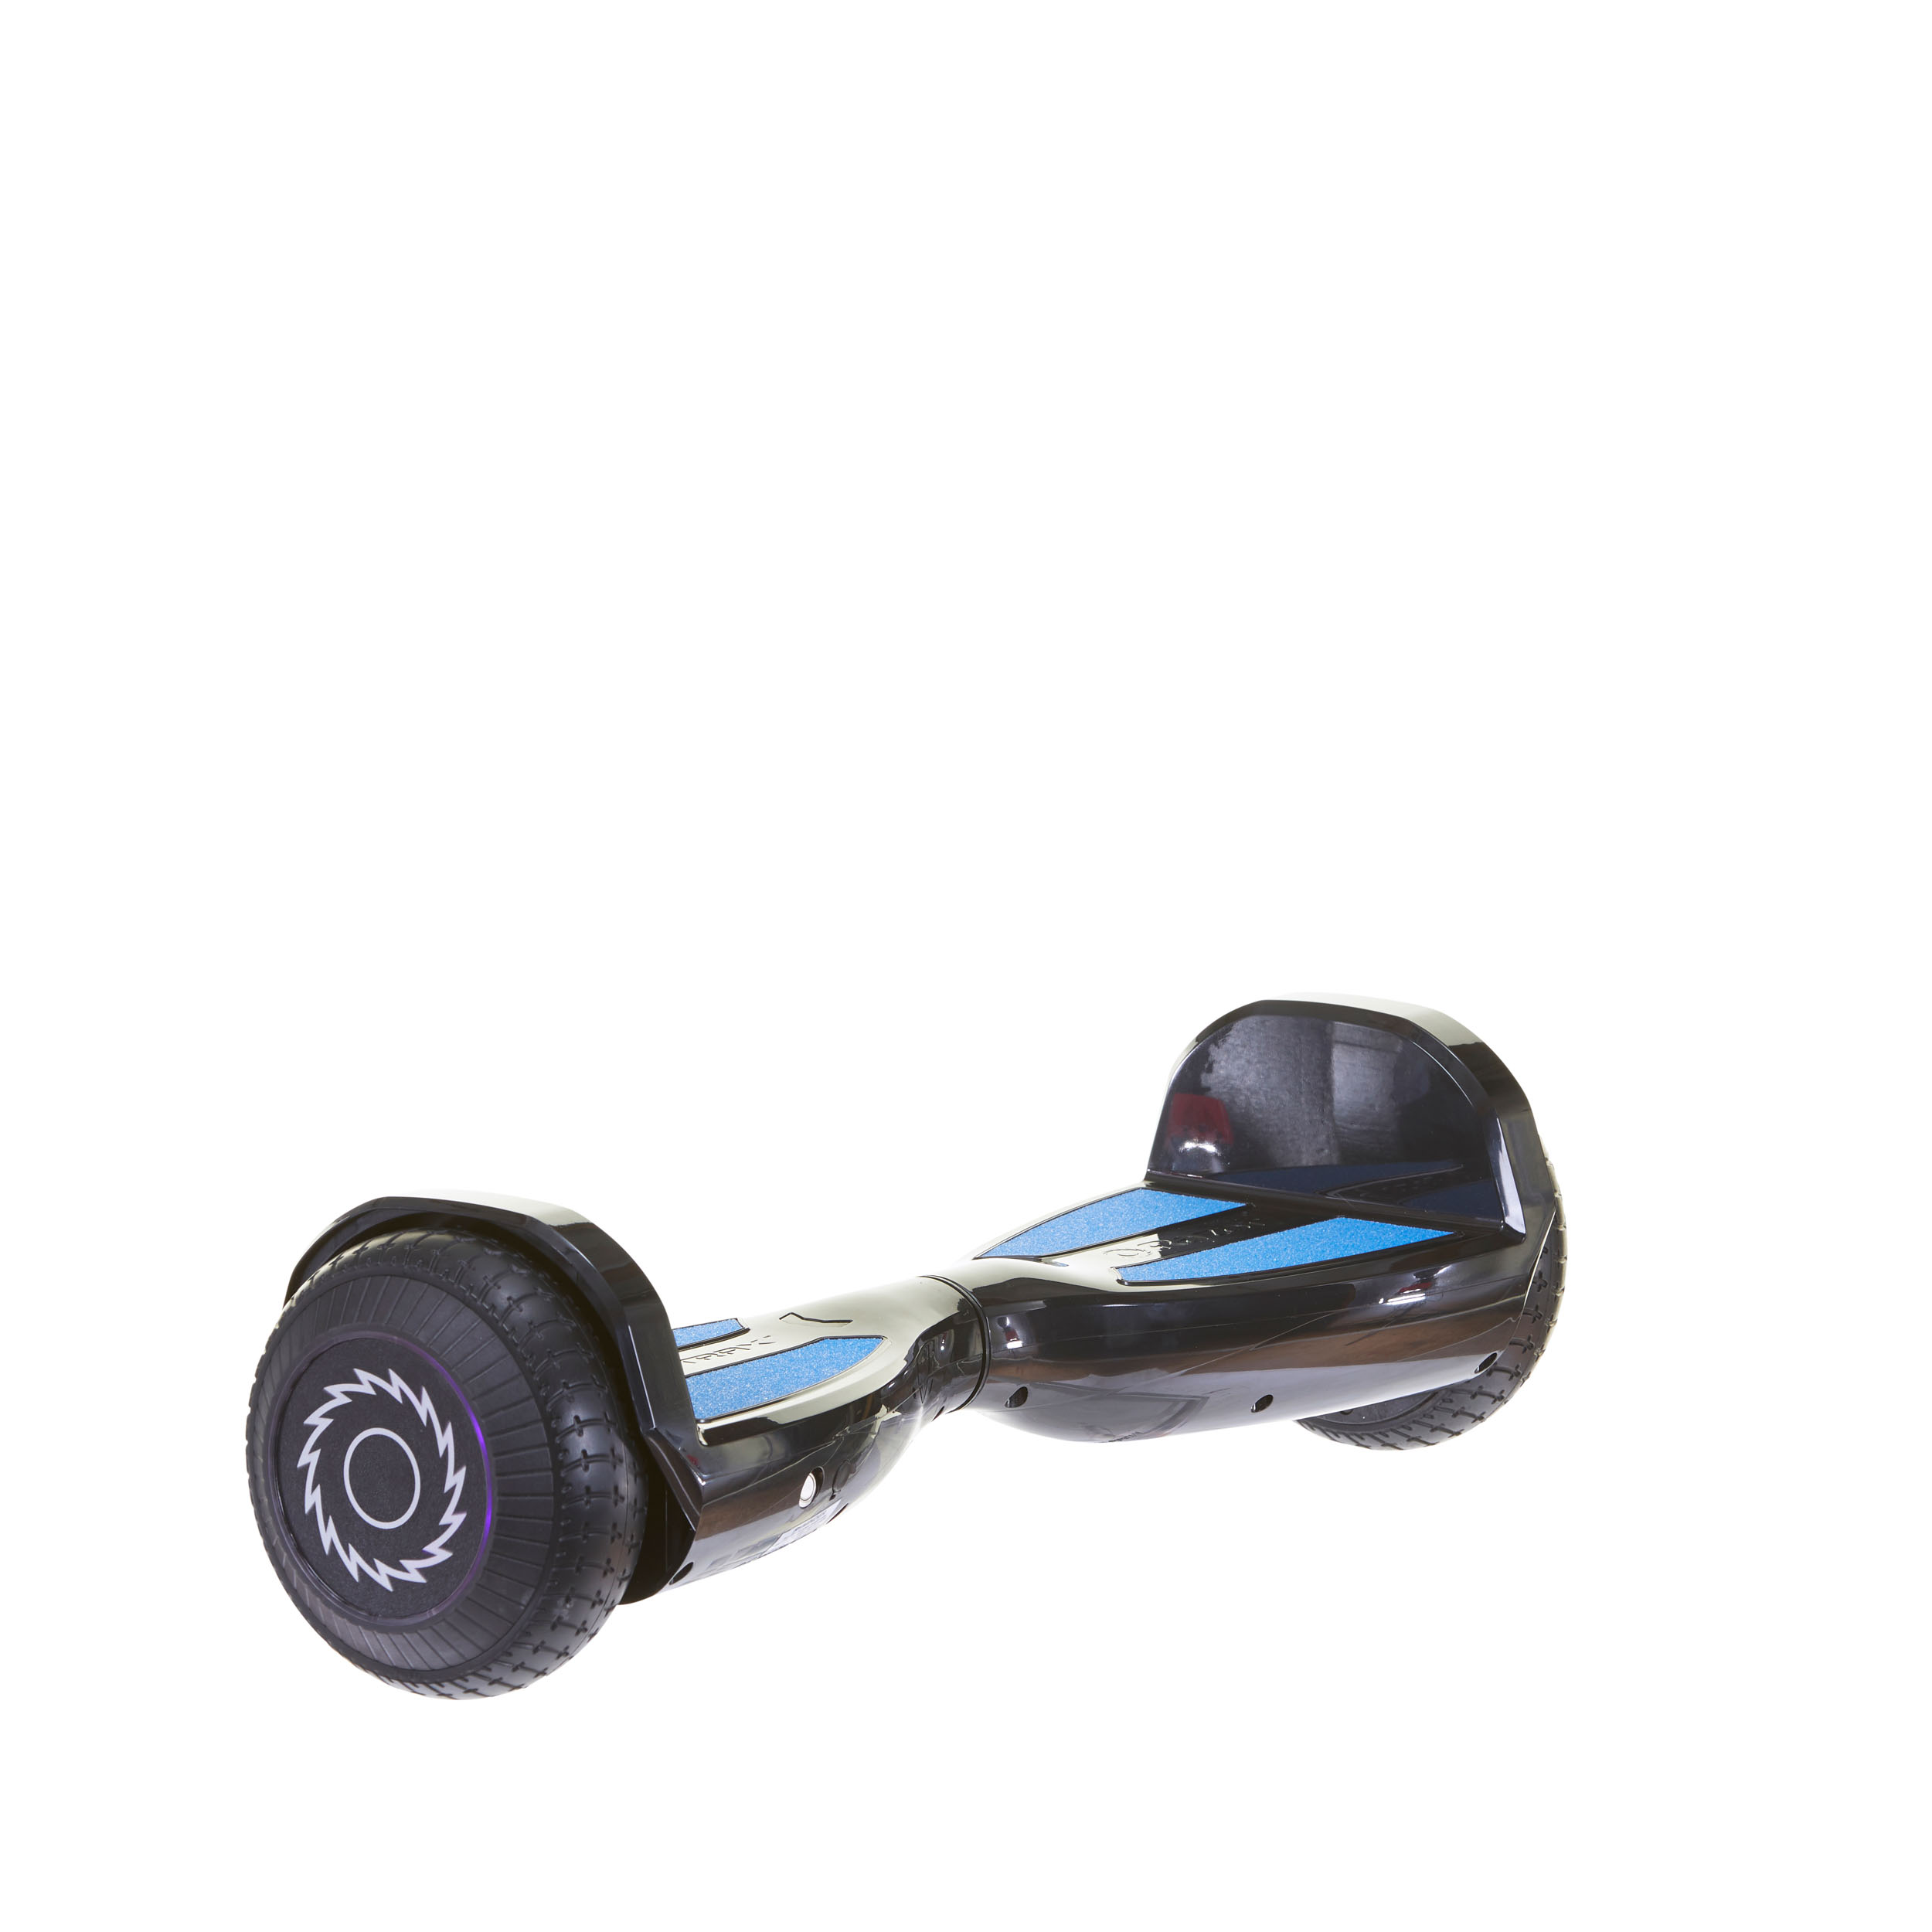 Razor Black Label Hovertrax Hoverboard for Kids Ages 8 and up - Black,  Customizable Color Grip Tape & LED Lights, Up to 9 mph and 6-mile Range,  25.2V Lithium-Ion Battery, UL2272 Certified 